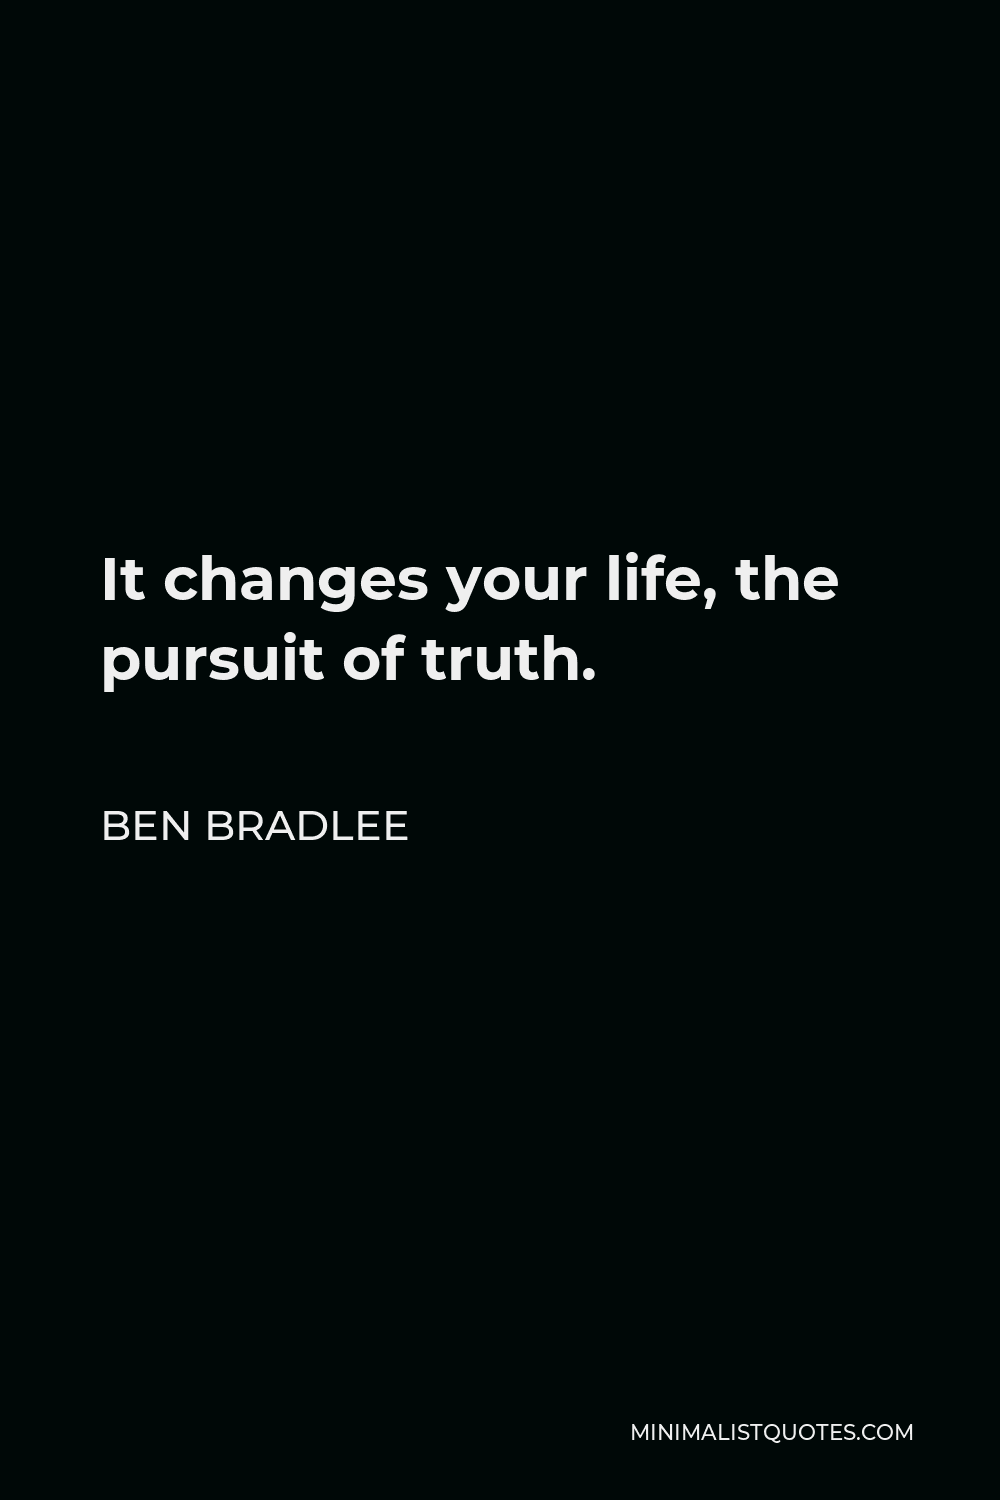 Ben Bradlee Quote - It changes your life, the pursuit of truth.